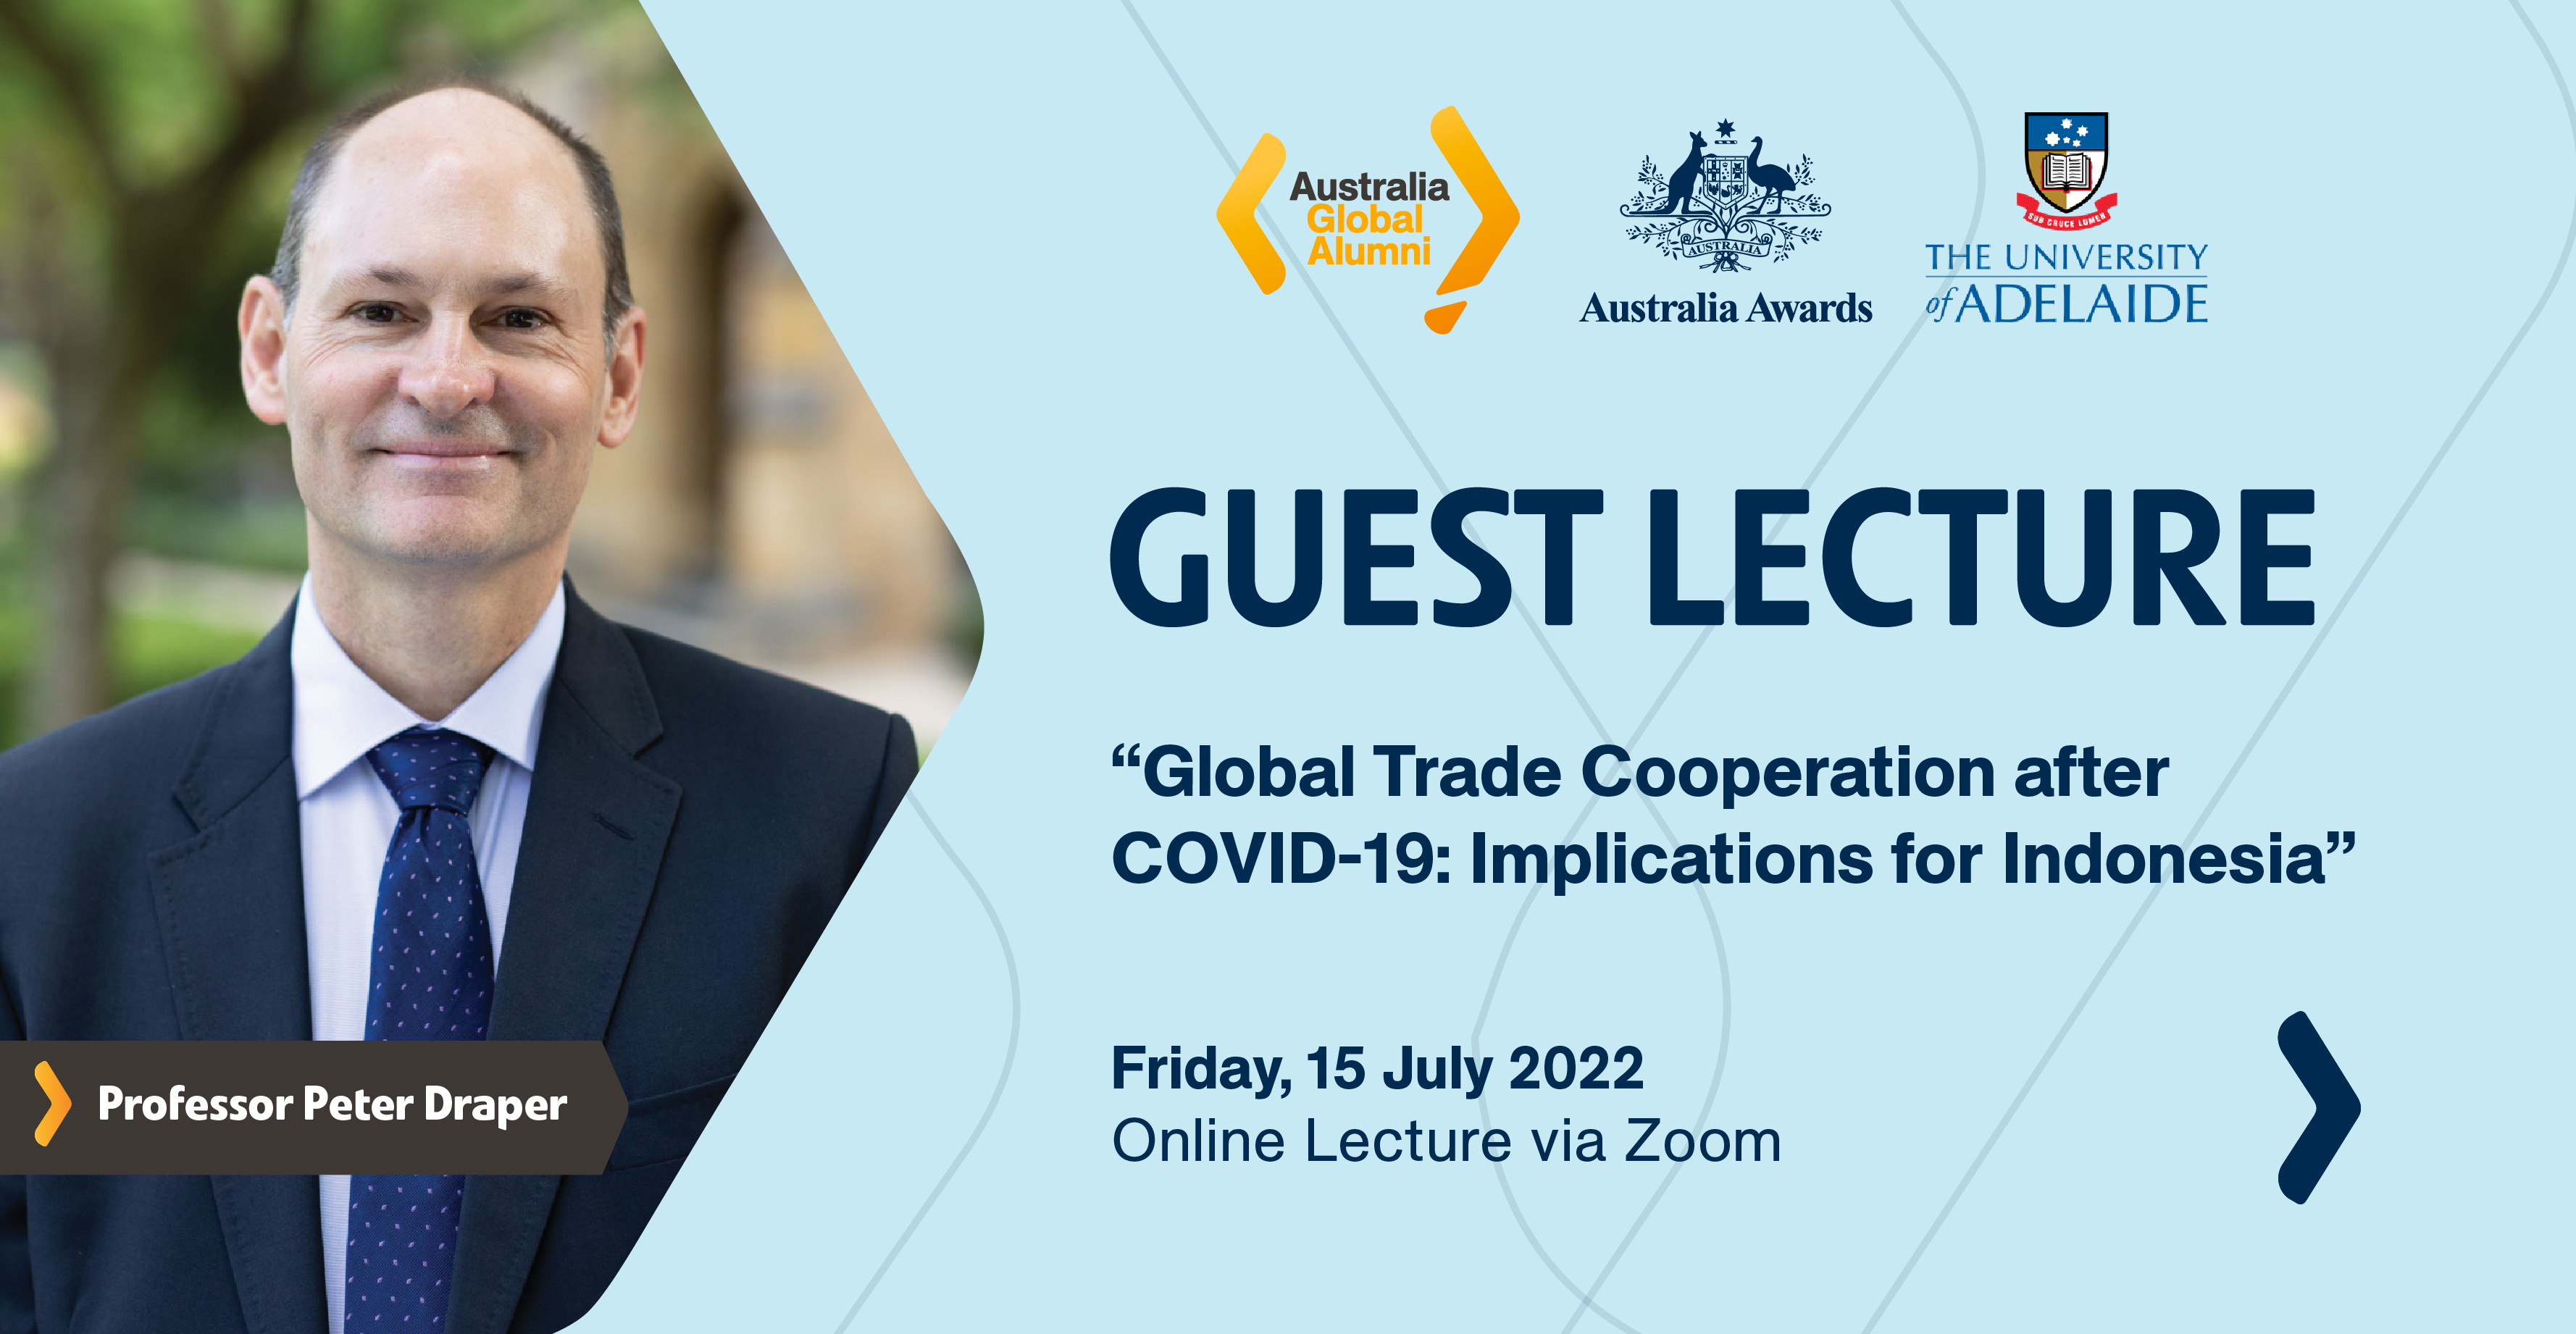 Join Our Lecture on Global Trade Cooperation after COVID-19: Implications for Indonesia